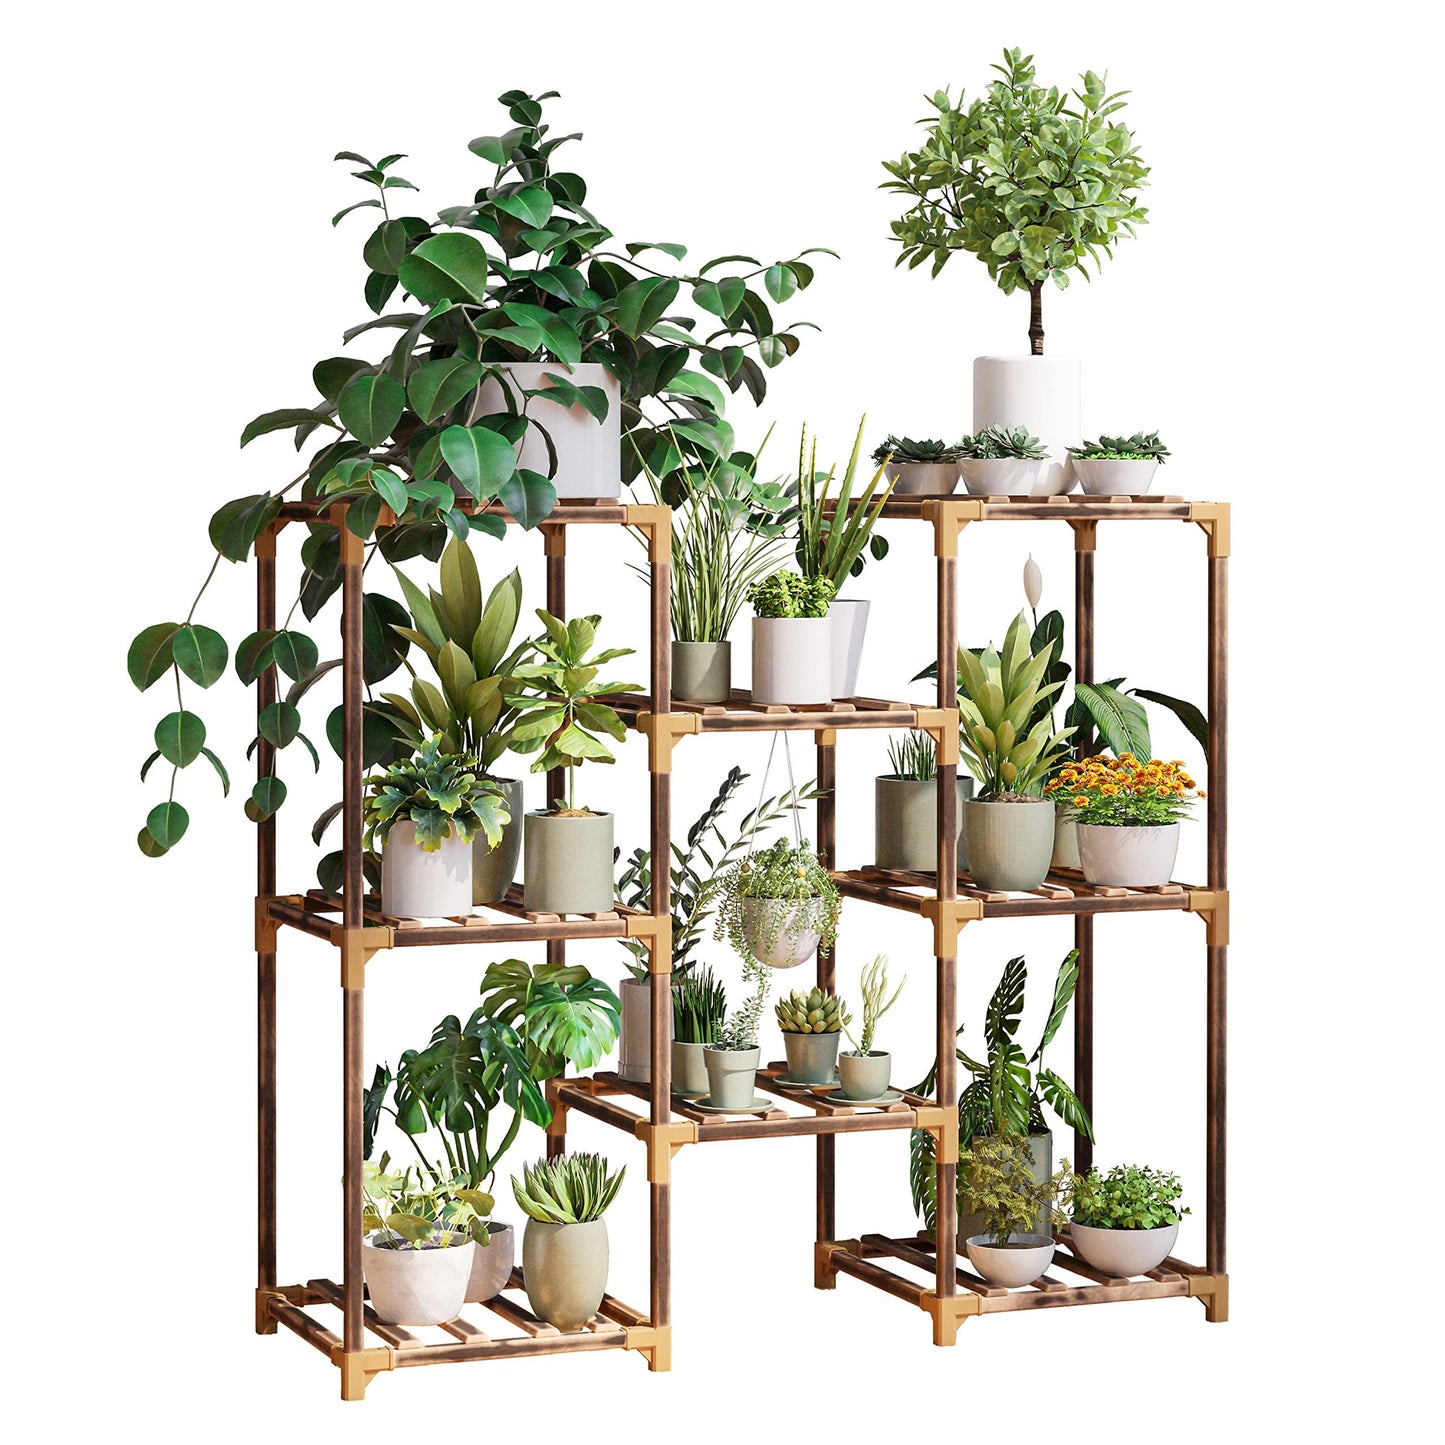 New England Stories Plant Stand Indoor, Outdoor Wood Plant Stands for Multiple Plants, Plant Shelf Ladder Table Plant Pot Stand for Living Room, Patio, Balcony, Plant Gardening Gift - CookCave